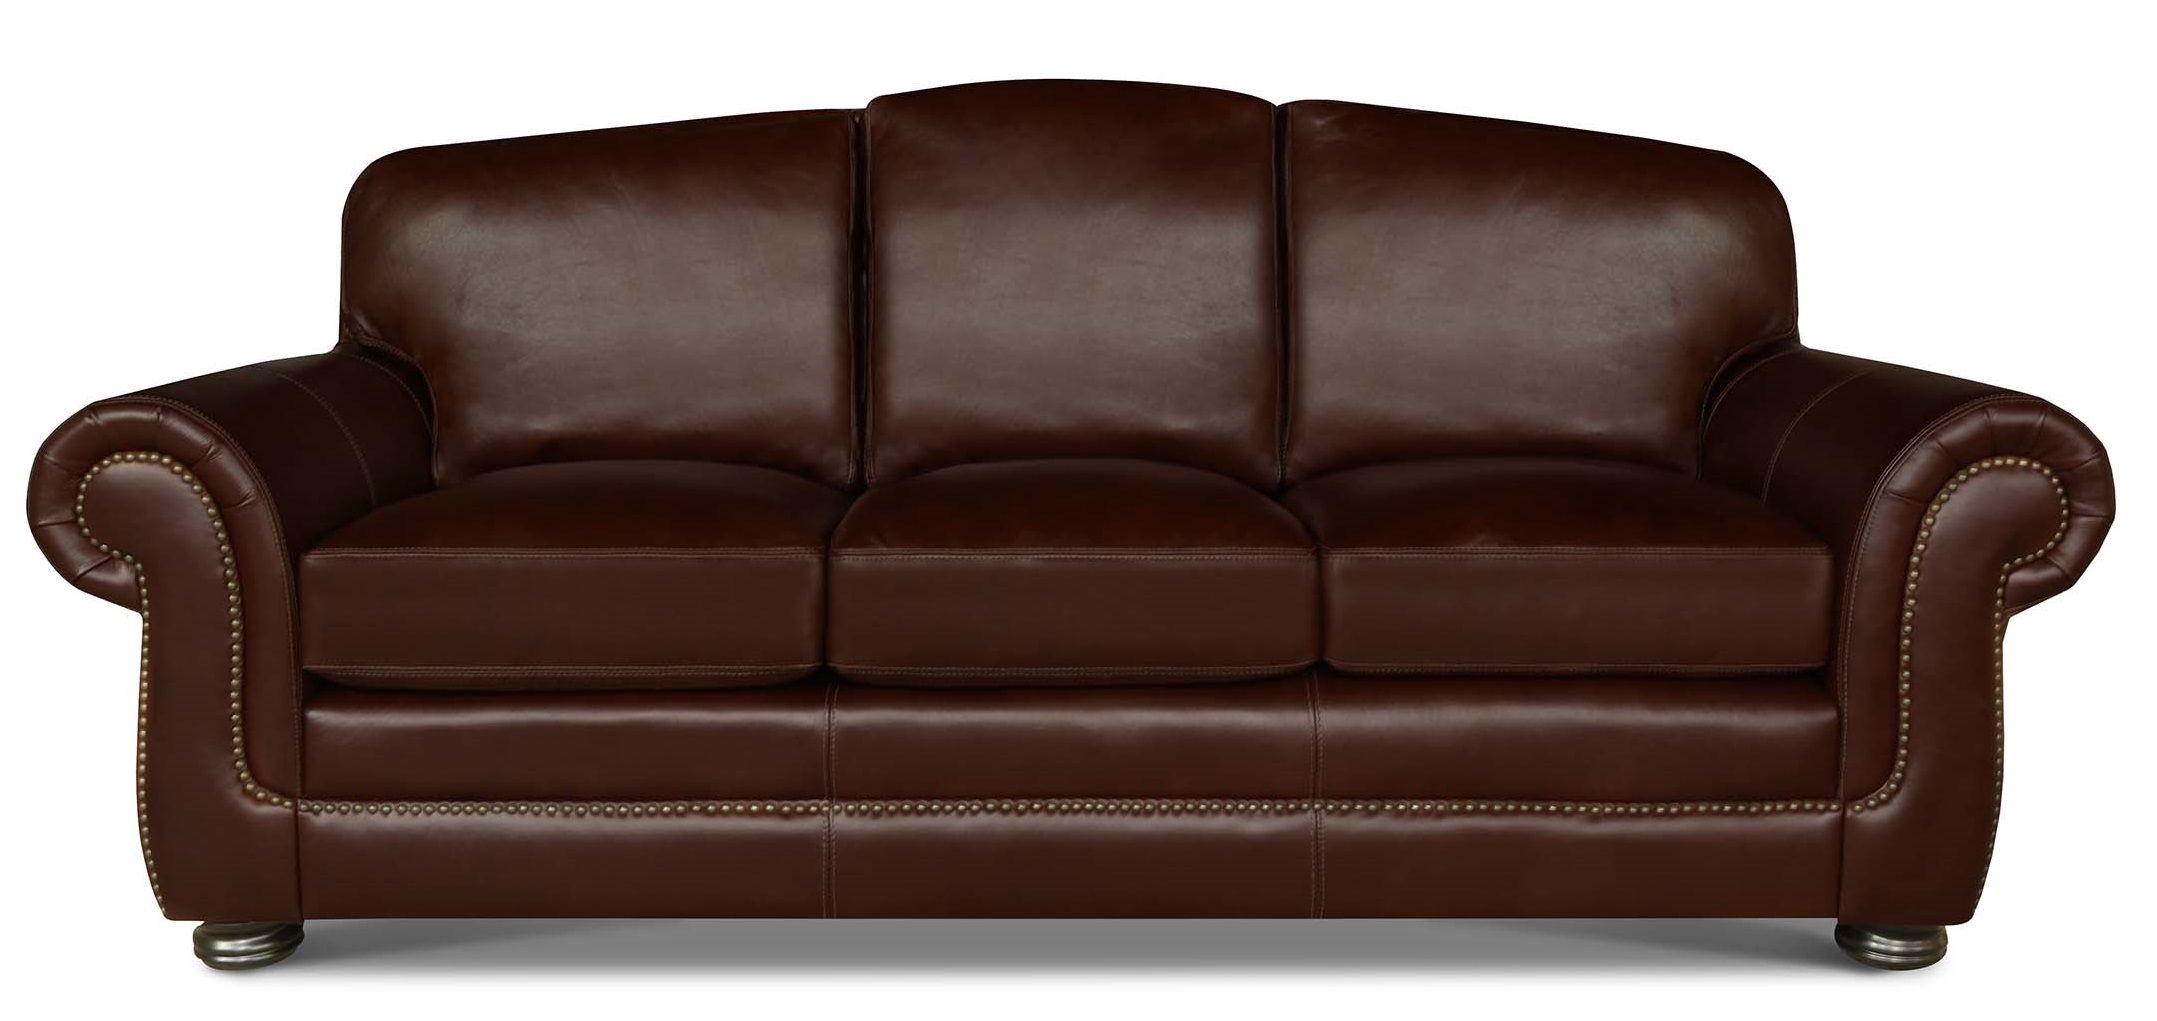 ﻿The Buckingham sofa adds a royal and distinctive touch with its sophisticated design and premium-quality leather.